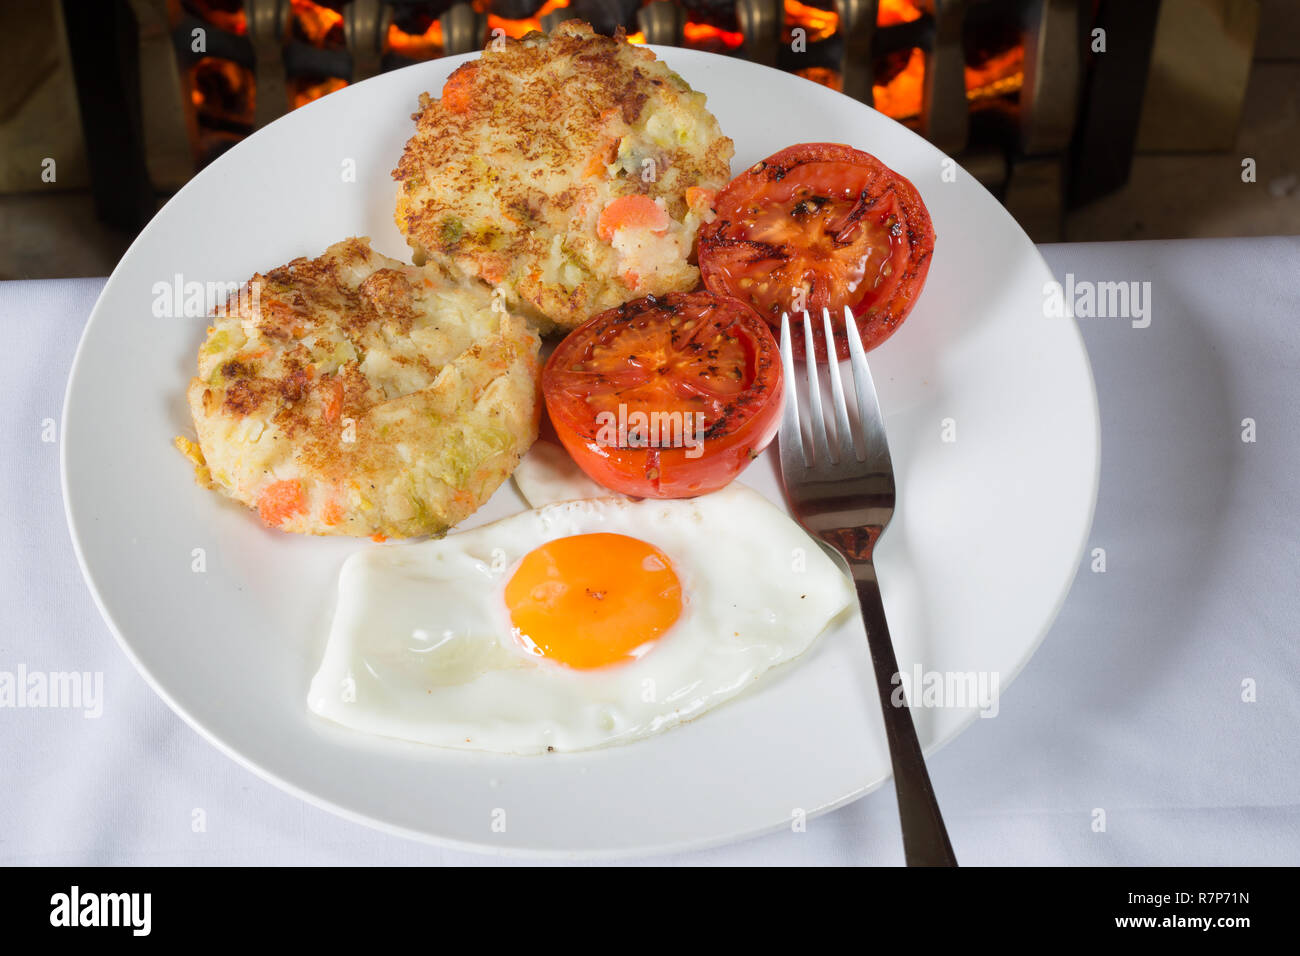 A Traditional dish of leftover Christmas dinner veg made into bubble and squeak served with fried egg and grilled Tomato Stock Photo